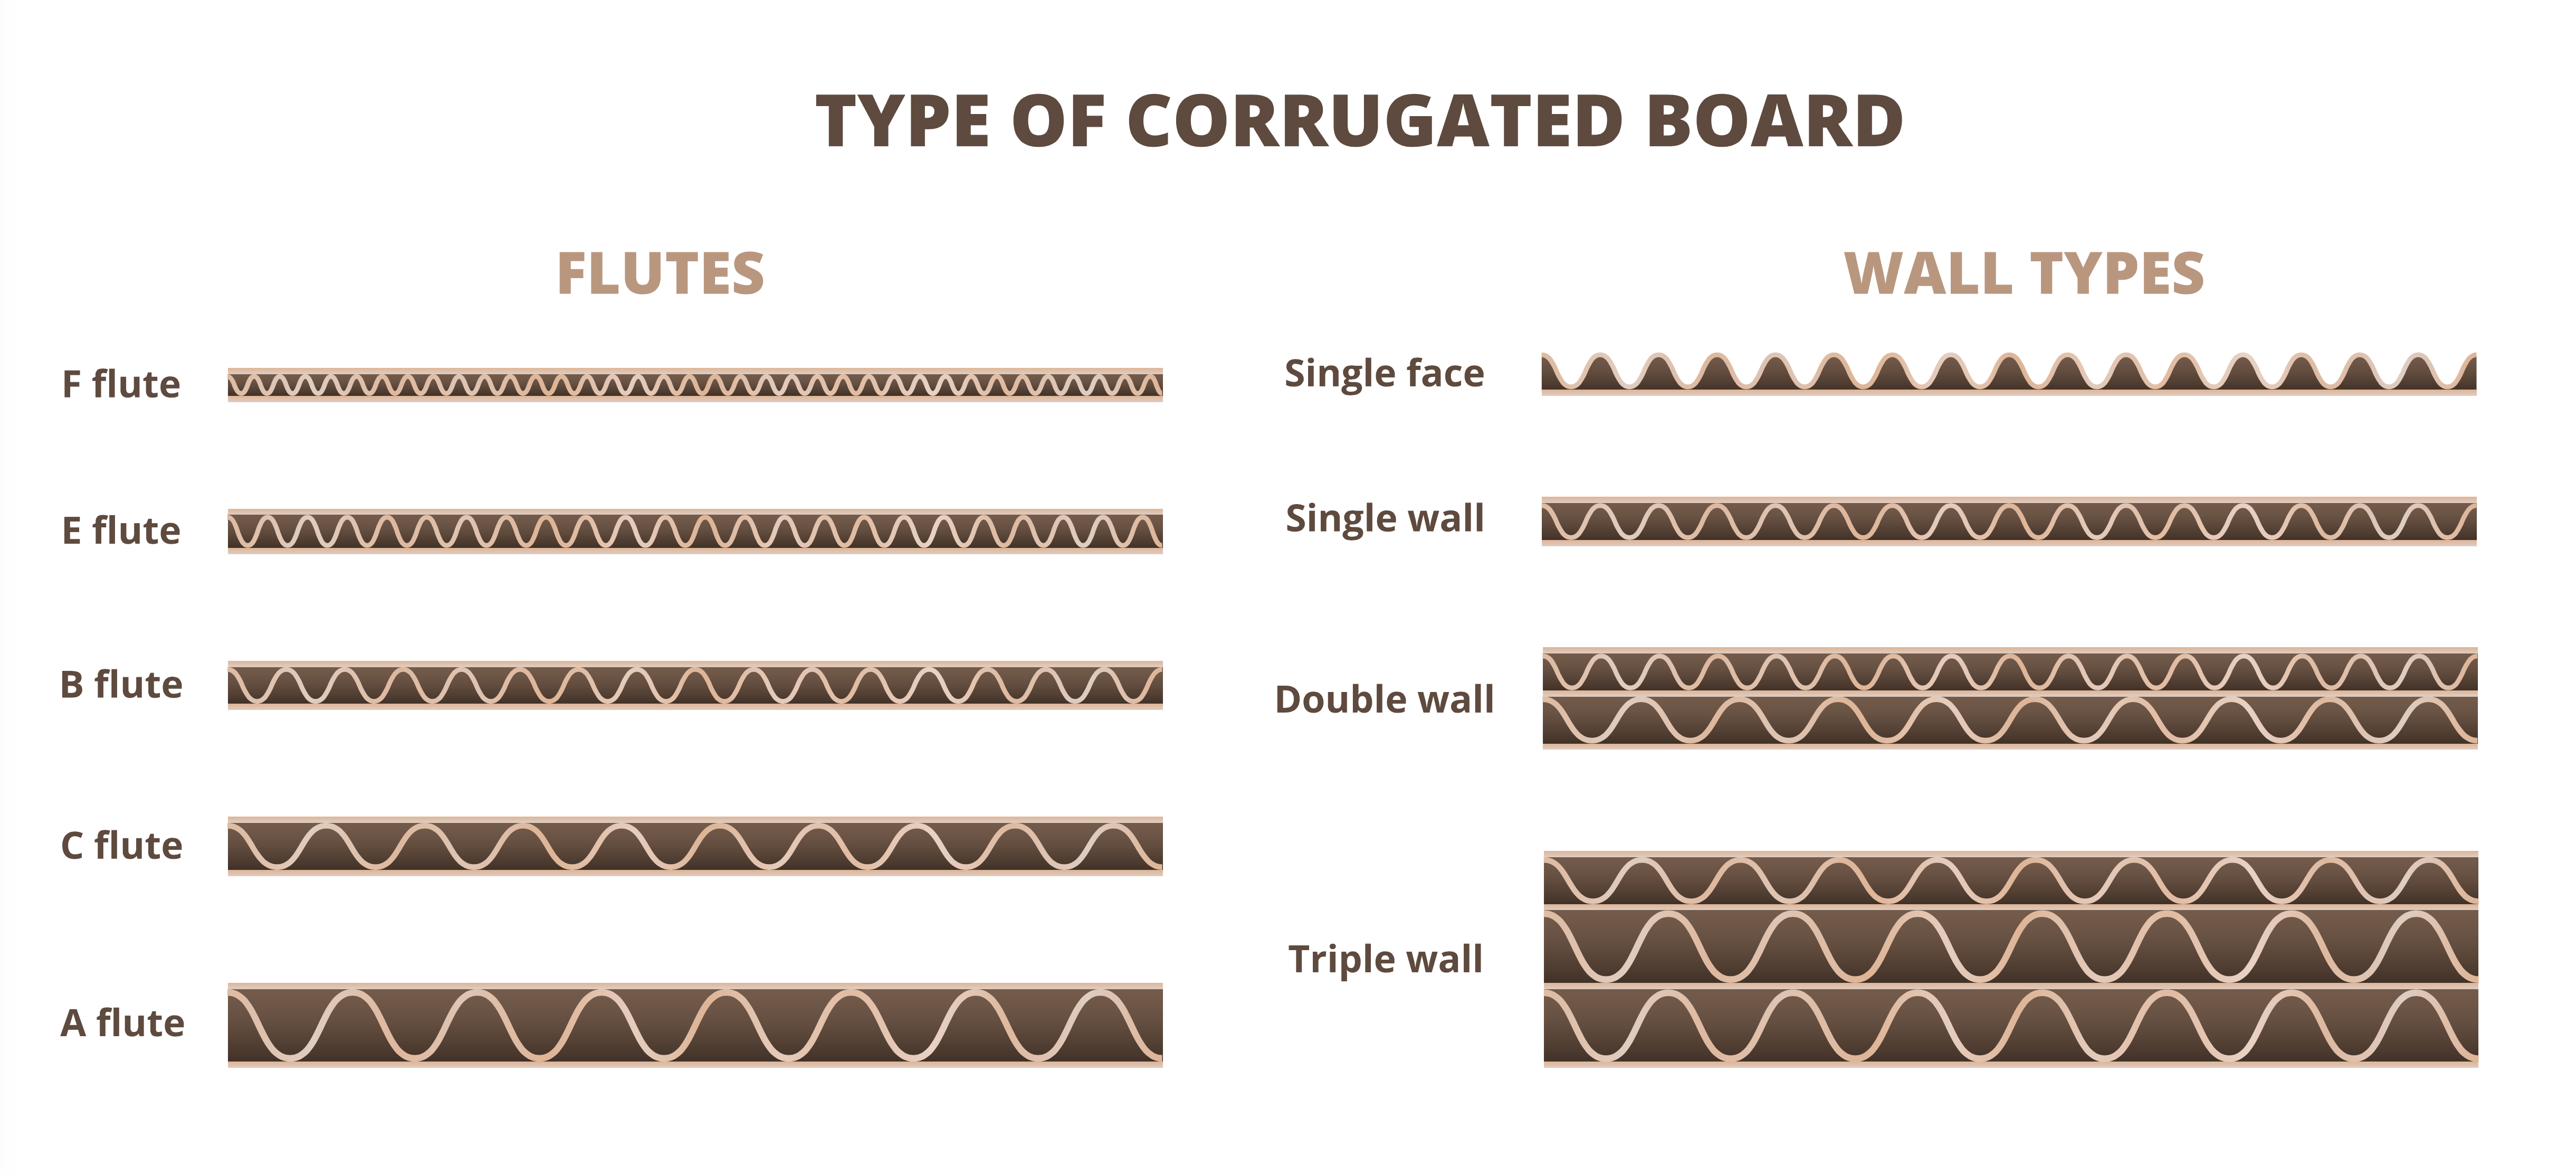 types of corrugated board flutes wall types